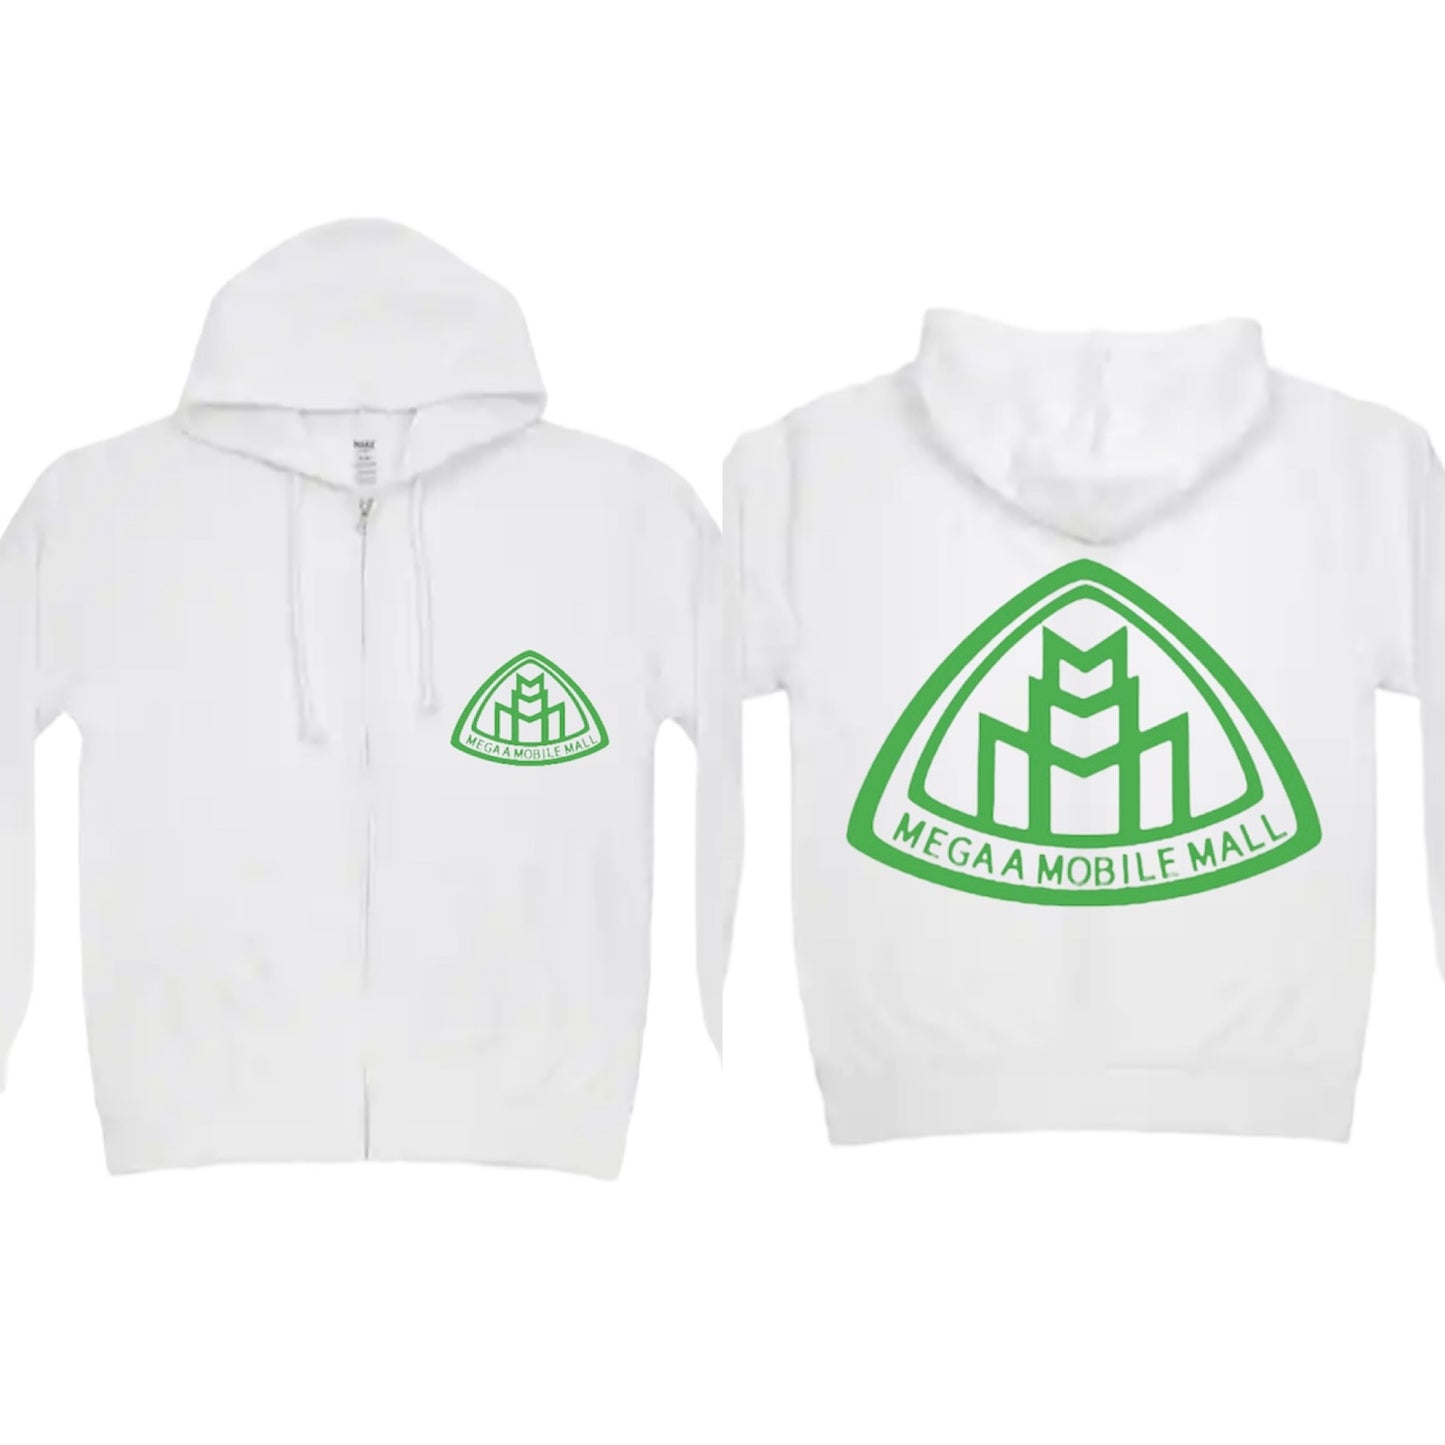 megaamobilemall white zip up hoodie with green logo